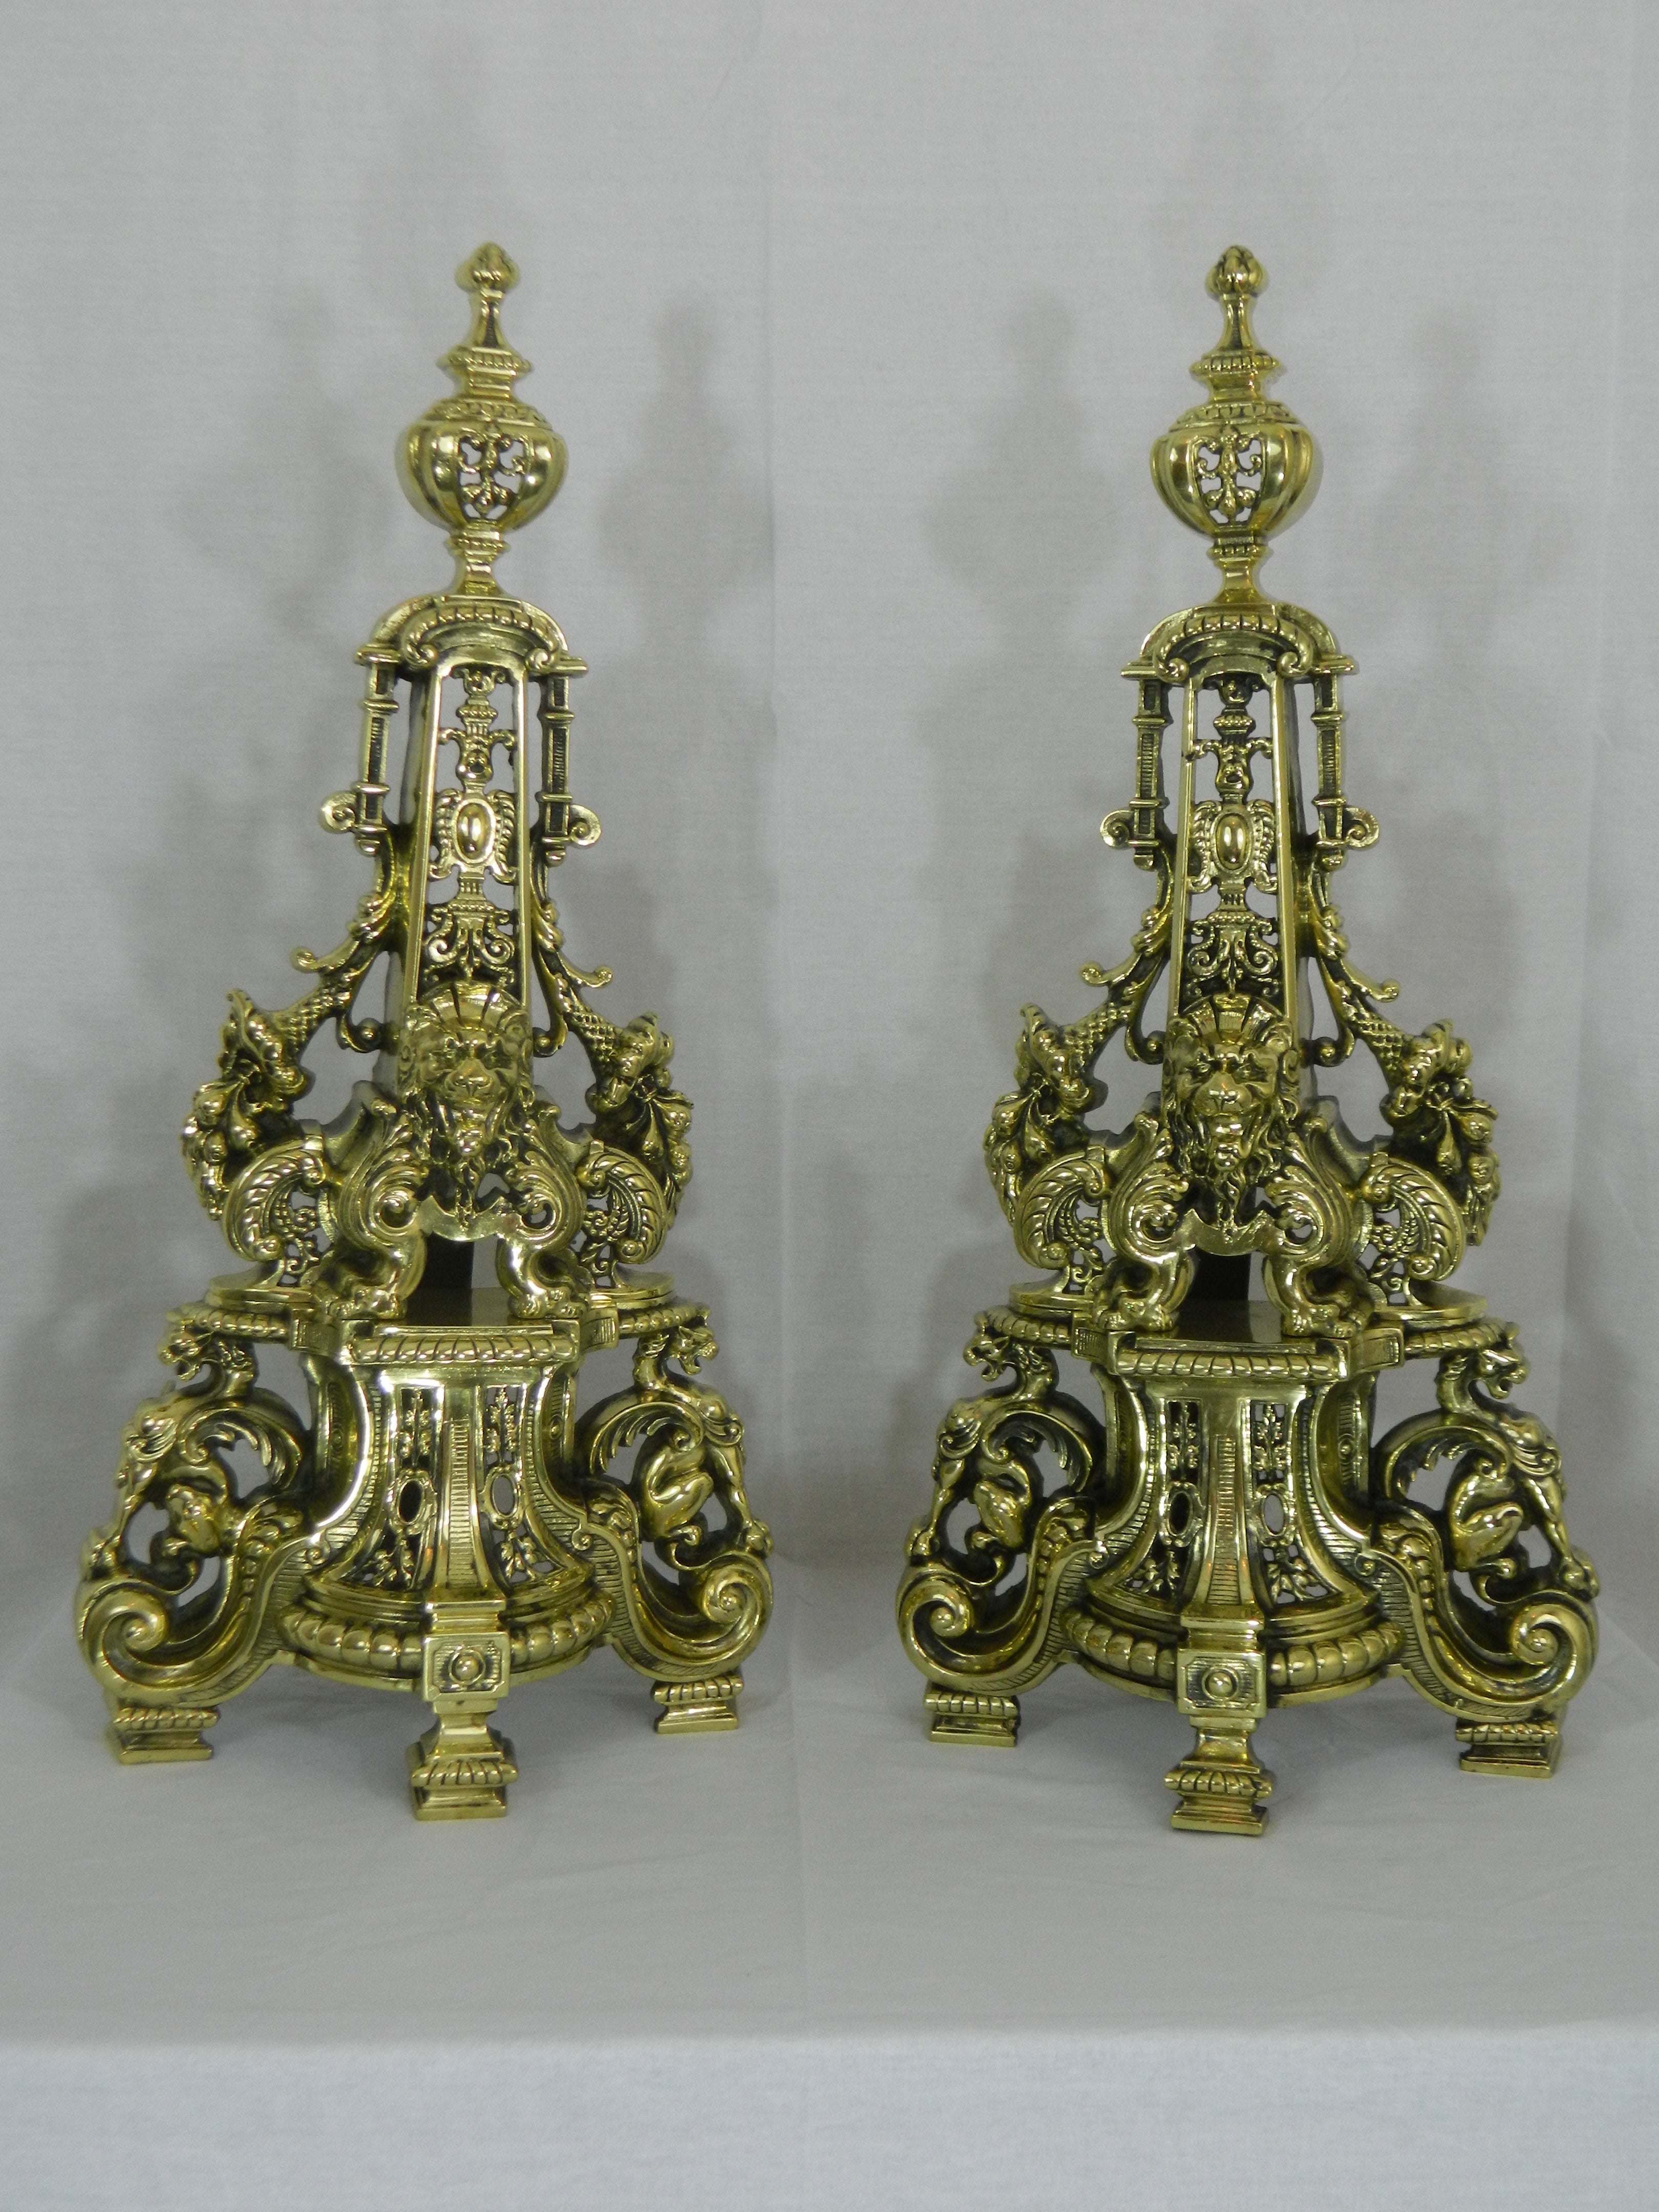 Pair of Tall Chenets or Andirons with Fleur de Lys and Center Bar or Fender